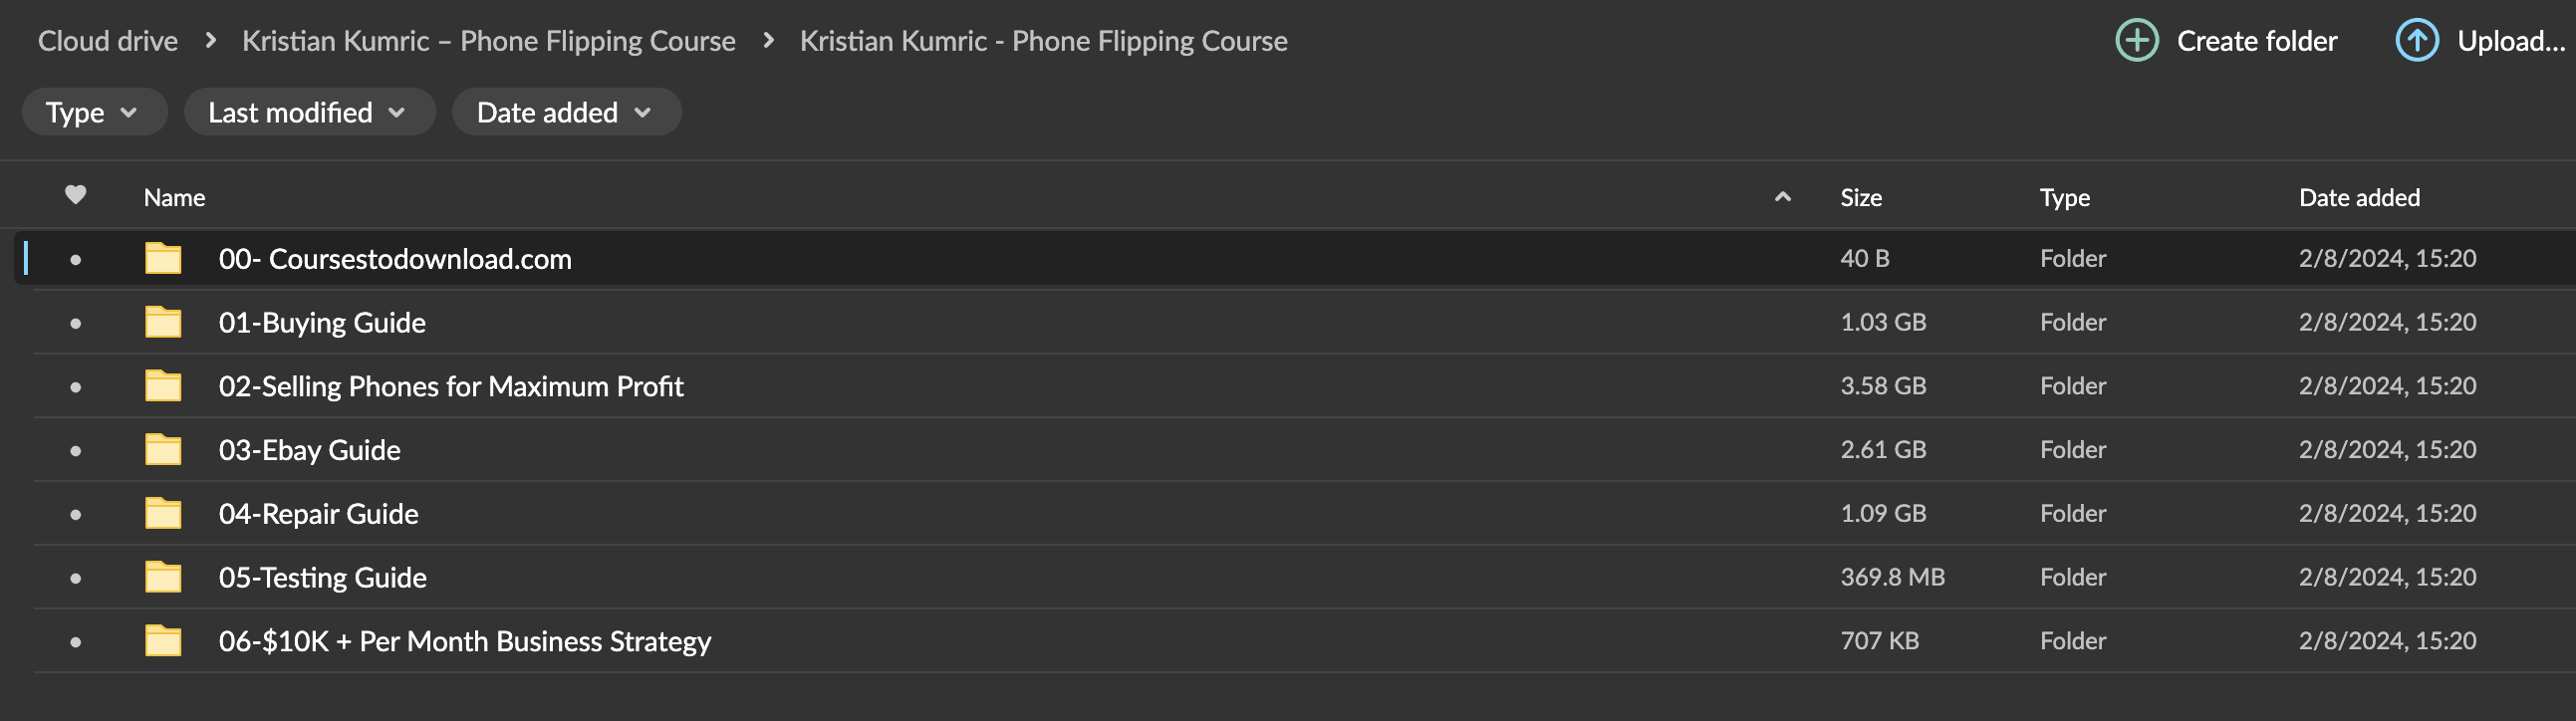 Kristian Kumric – Phone Flipping Course Download